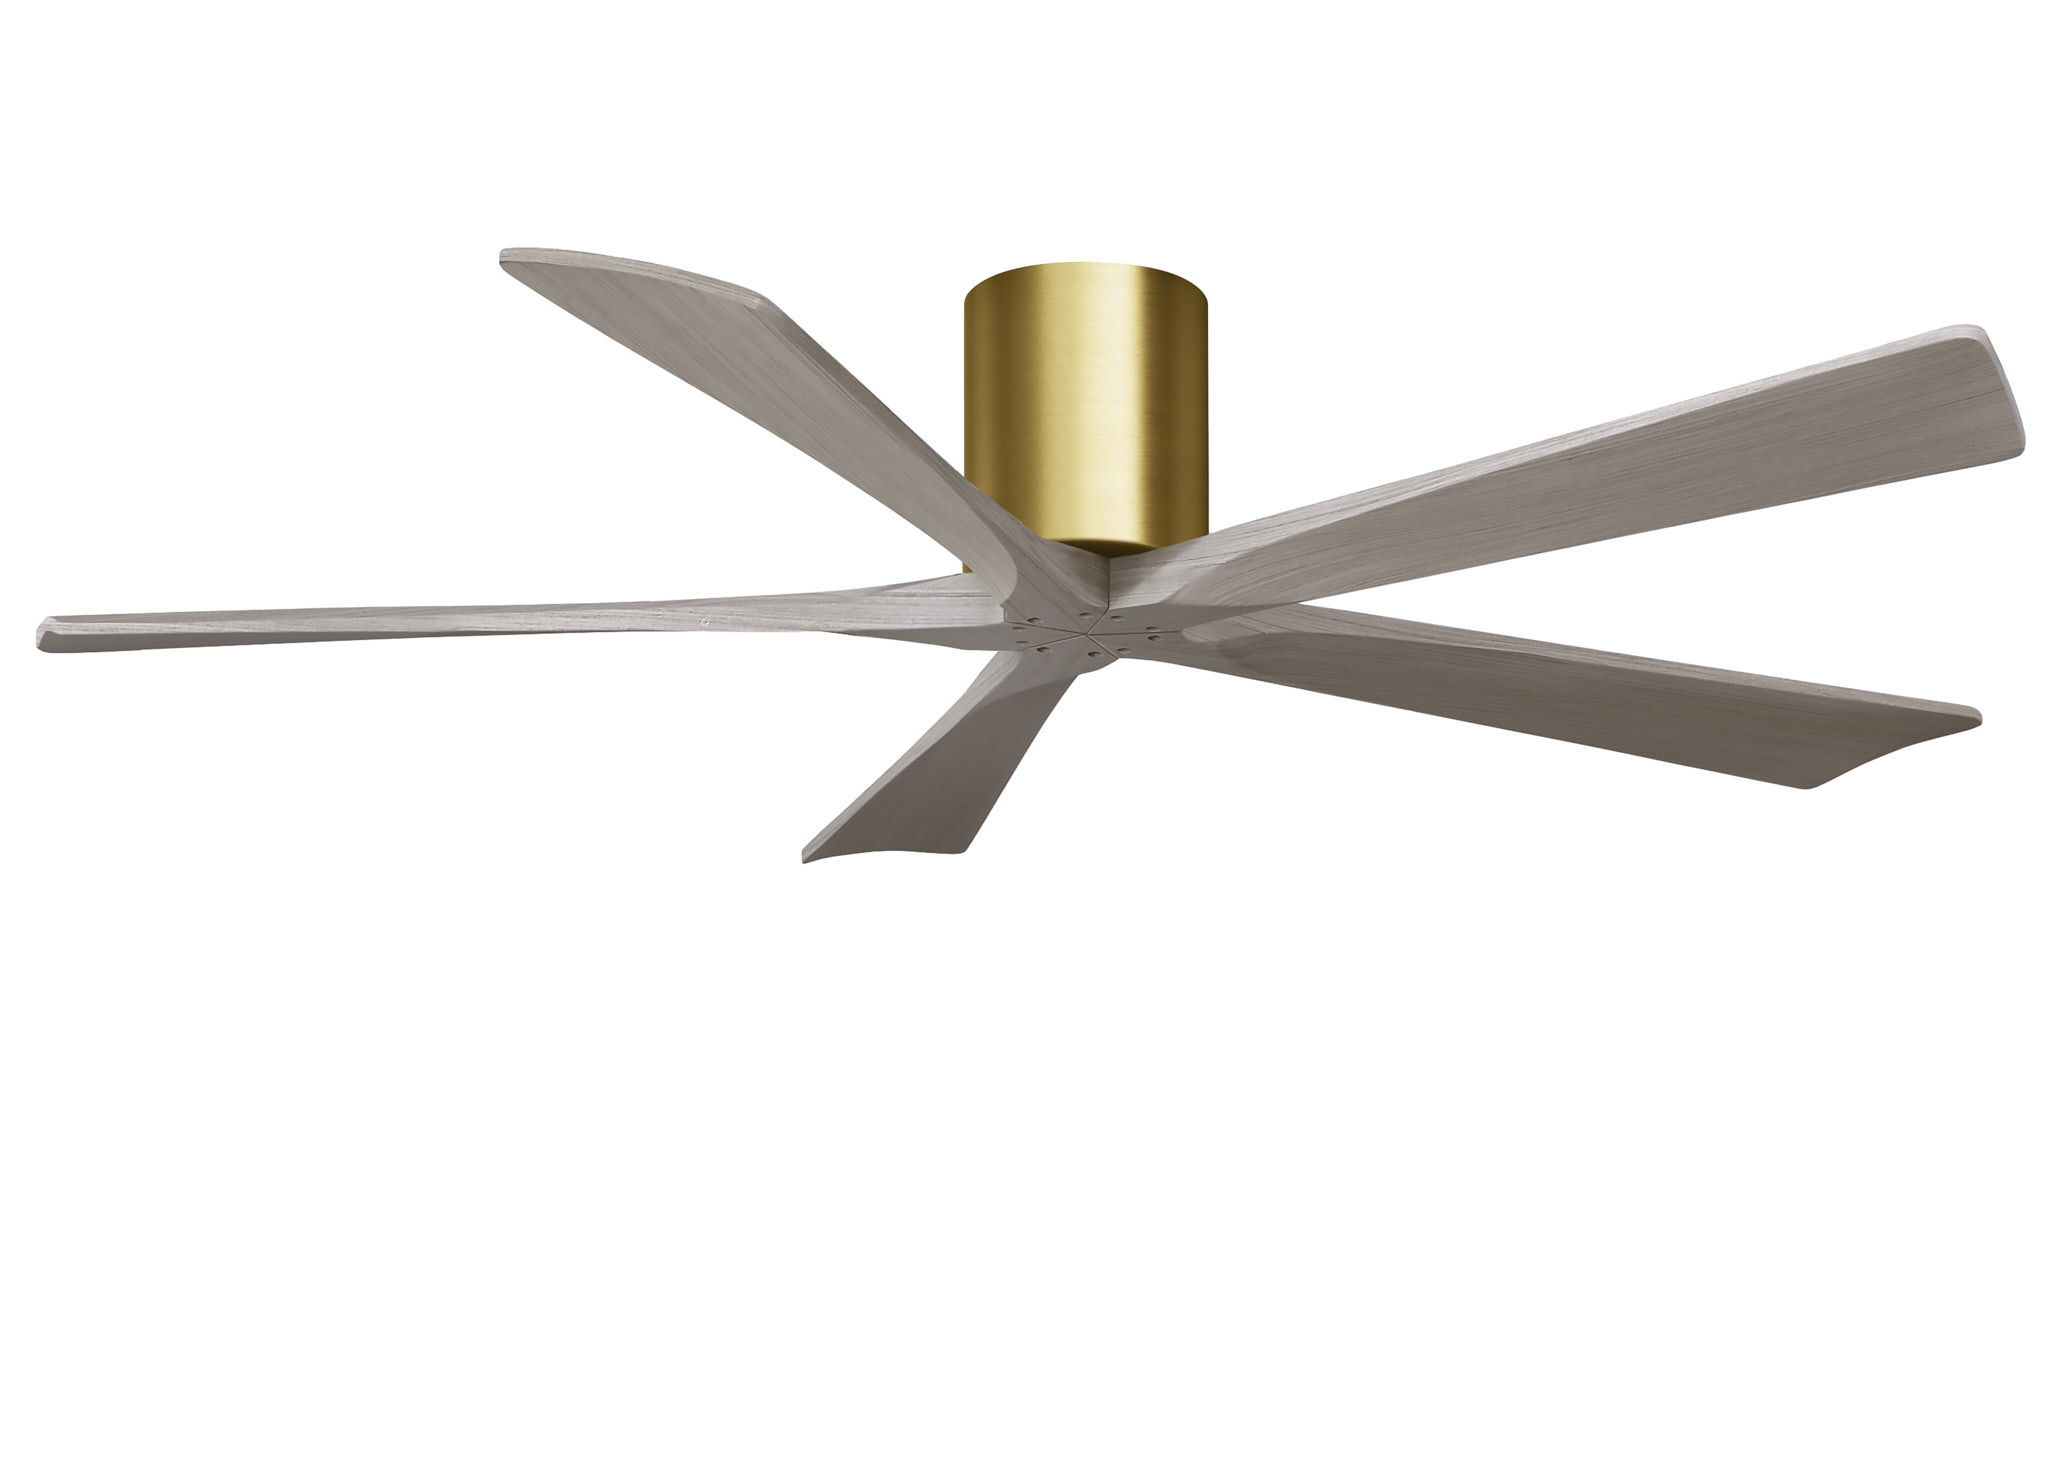 Irene-5H 6-speed ceiling fan in brushed brass finish with 60